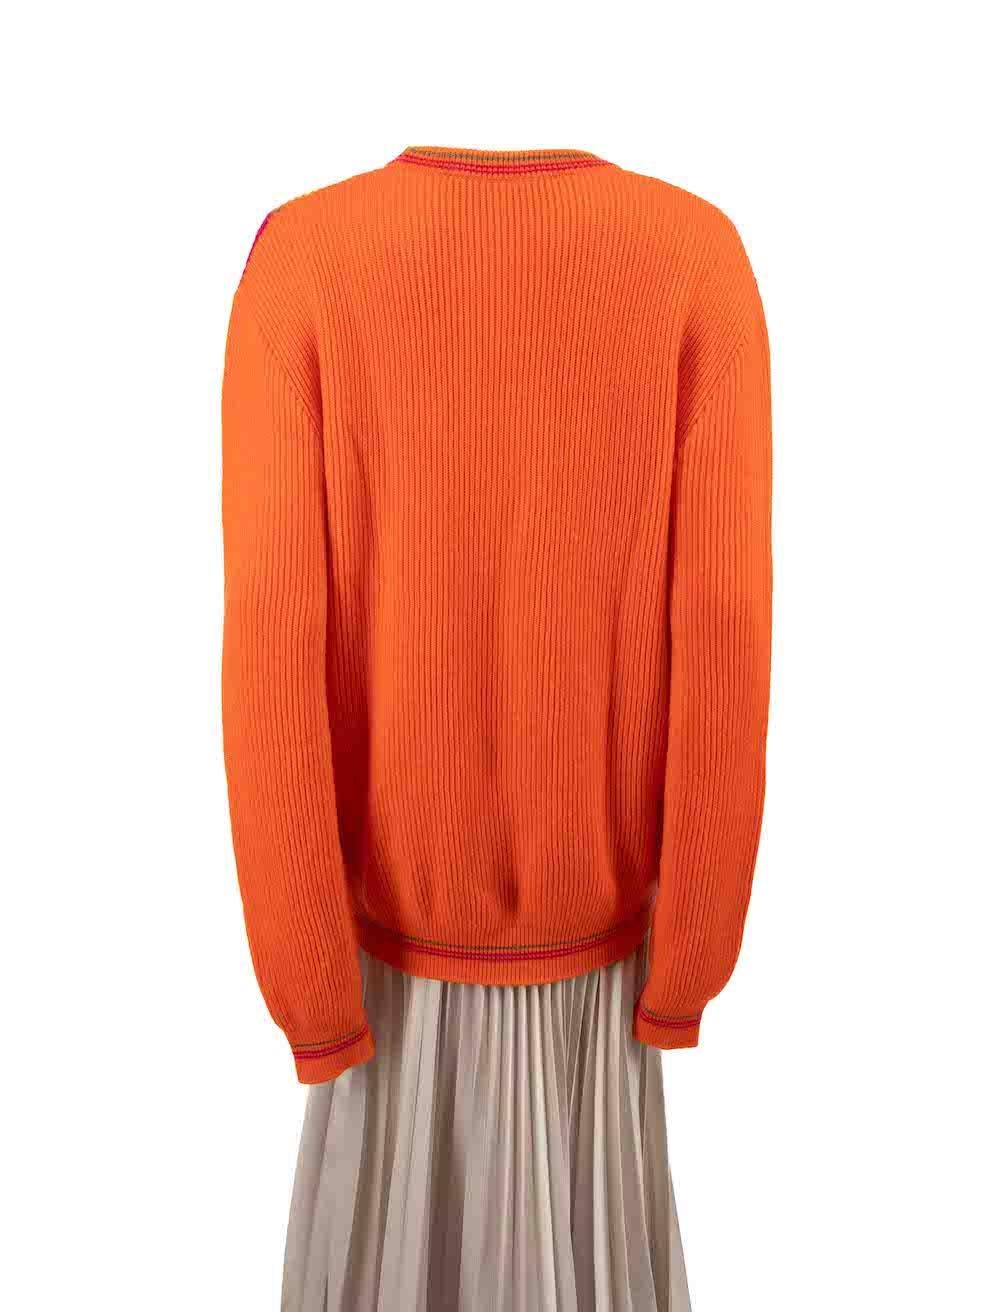 Versace Orange Argyle Knitted Jumper Size L In Excellent Condition For Sale In London, GB